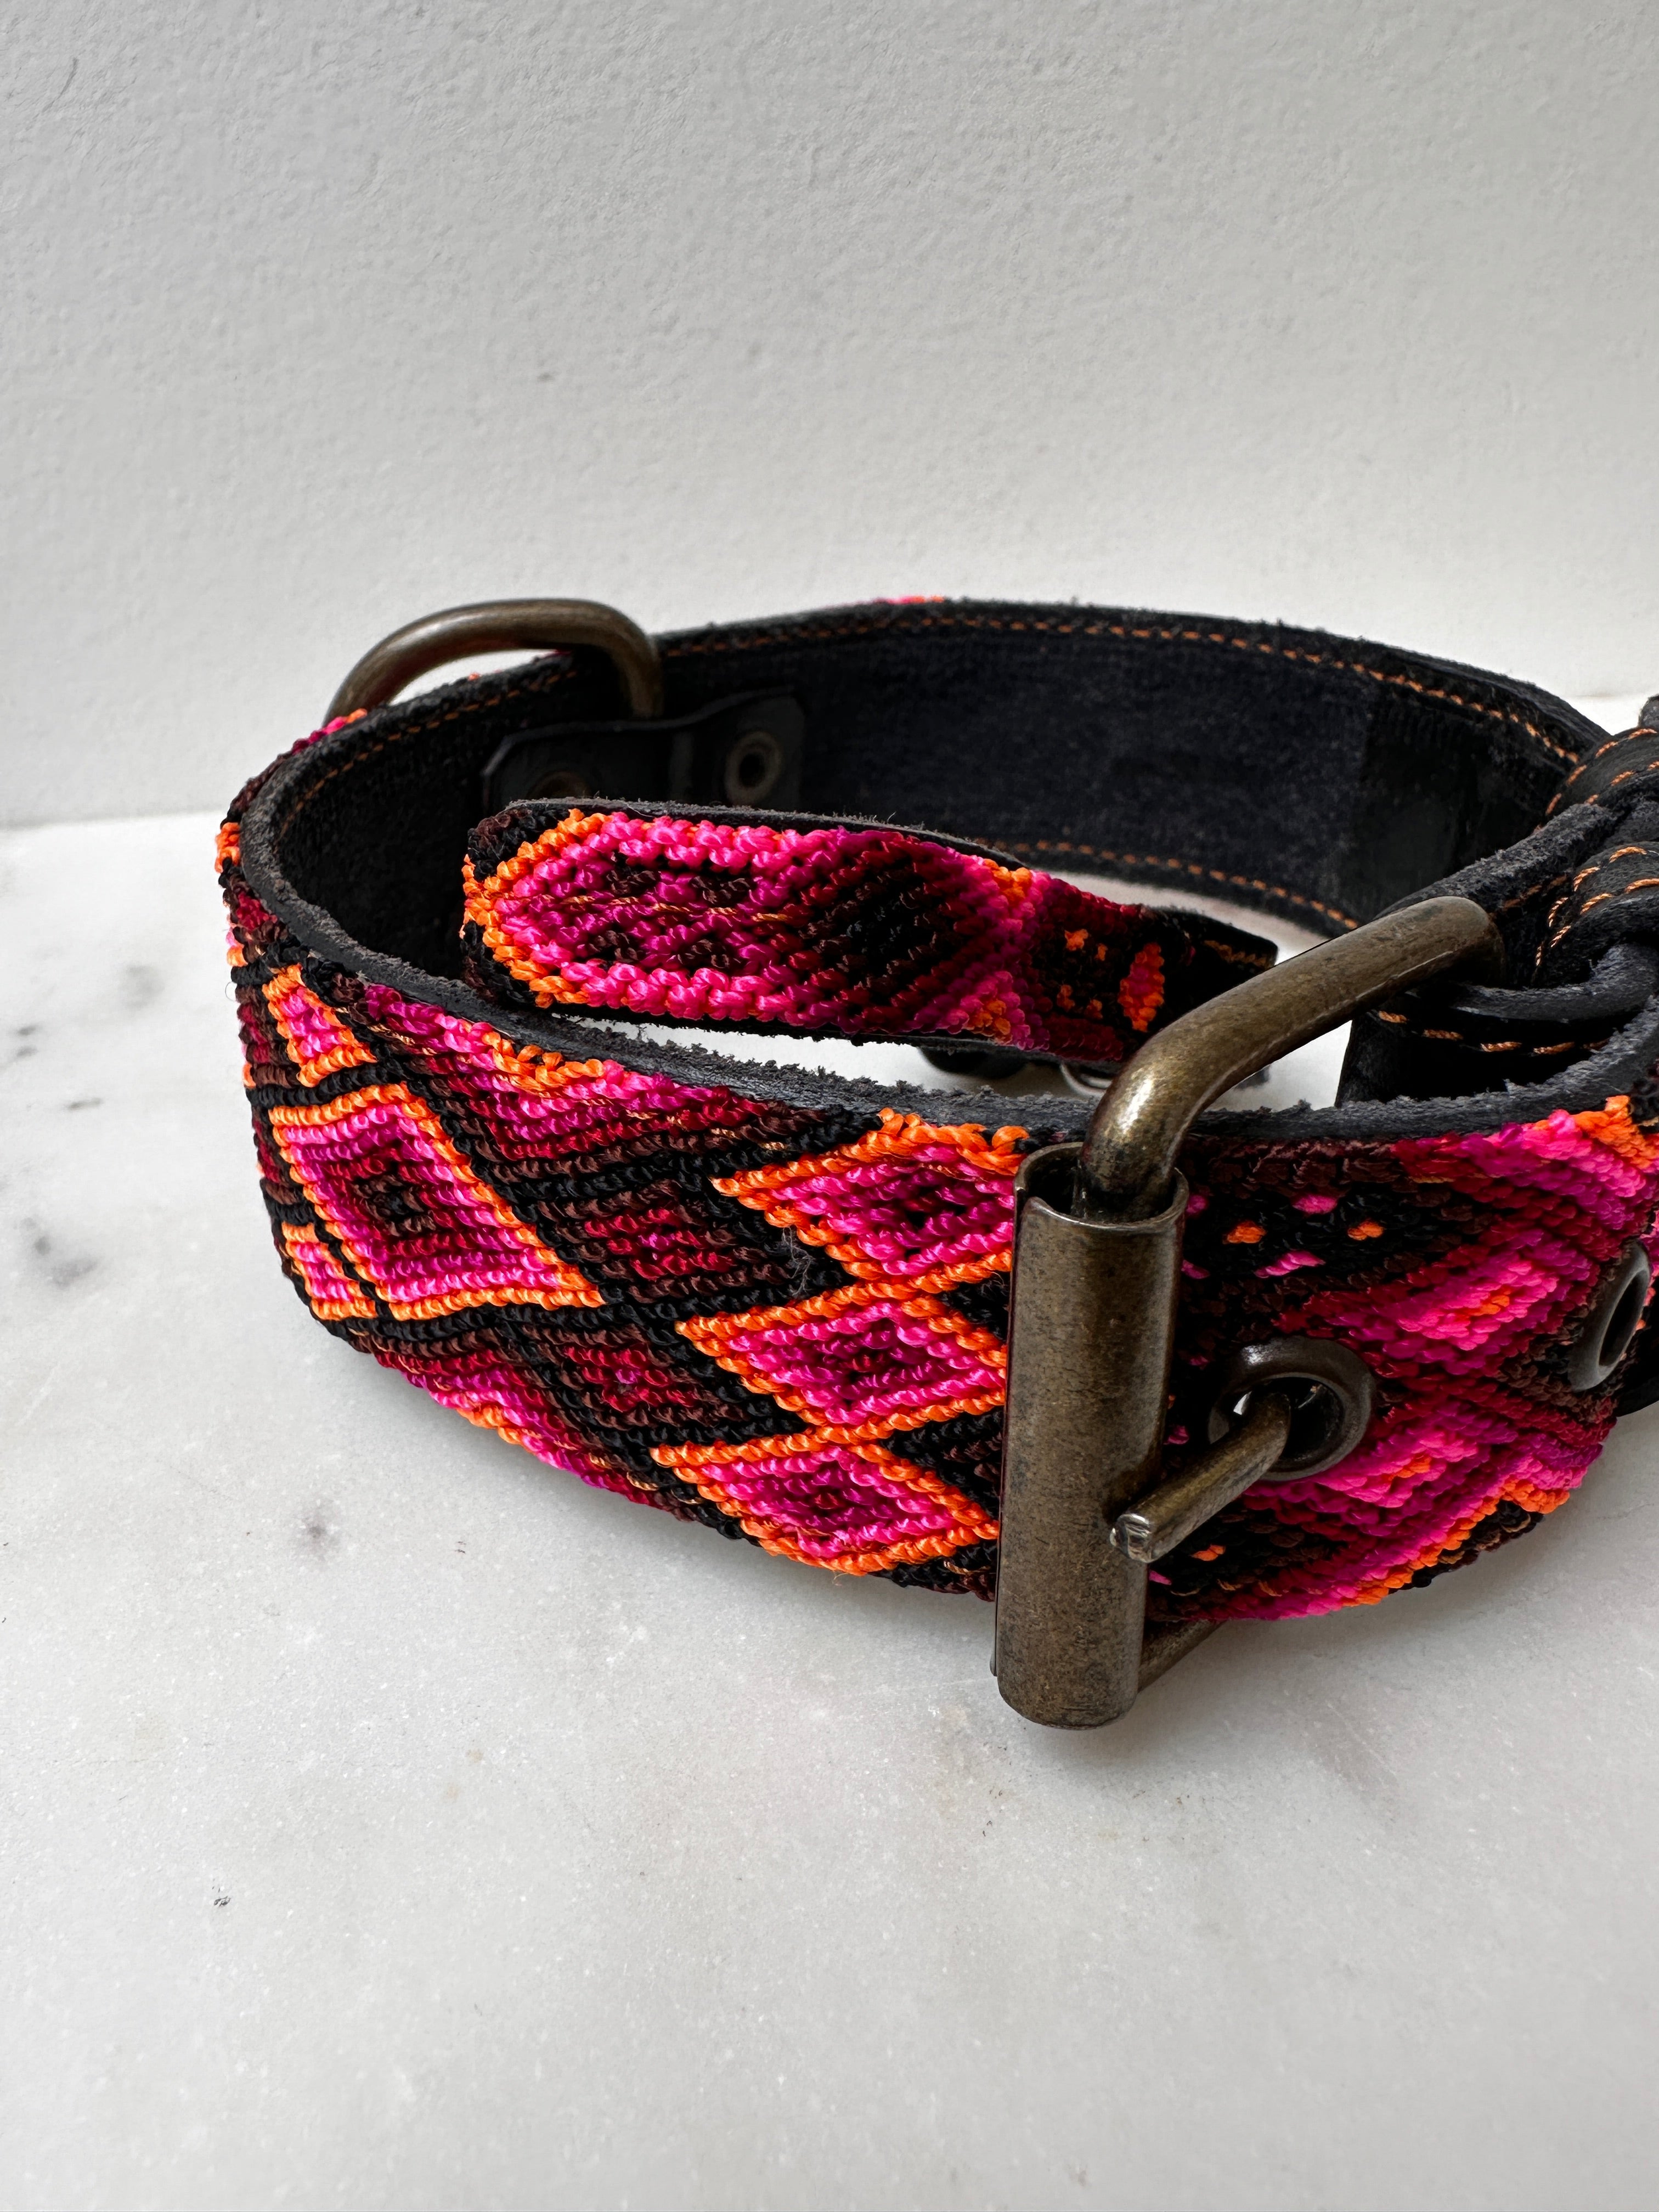 Future Nomads Homewares One Size Huichol Embroidered Wide Dog Collar M4